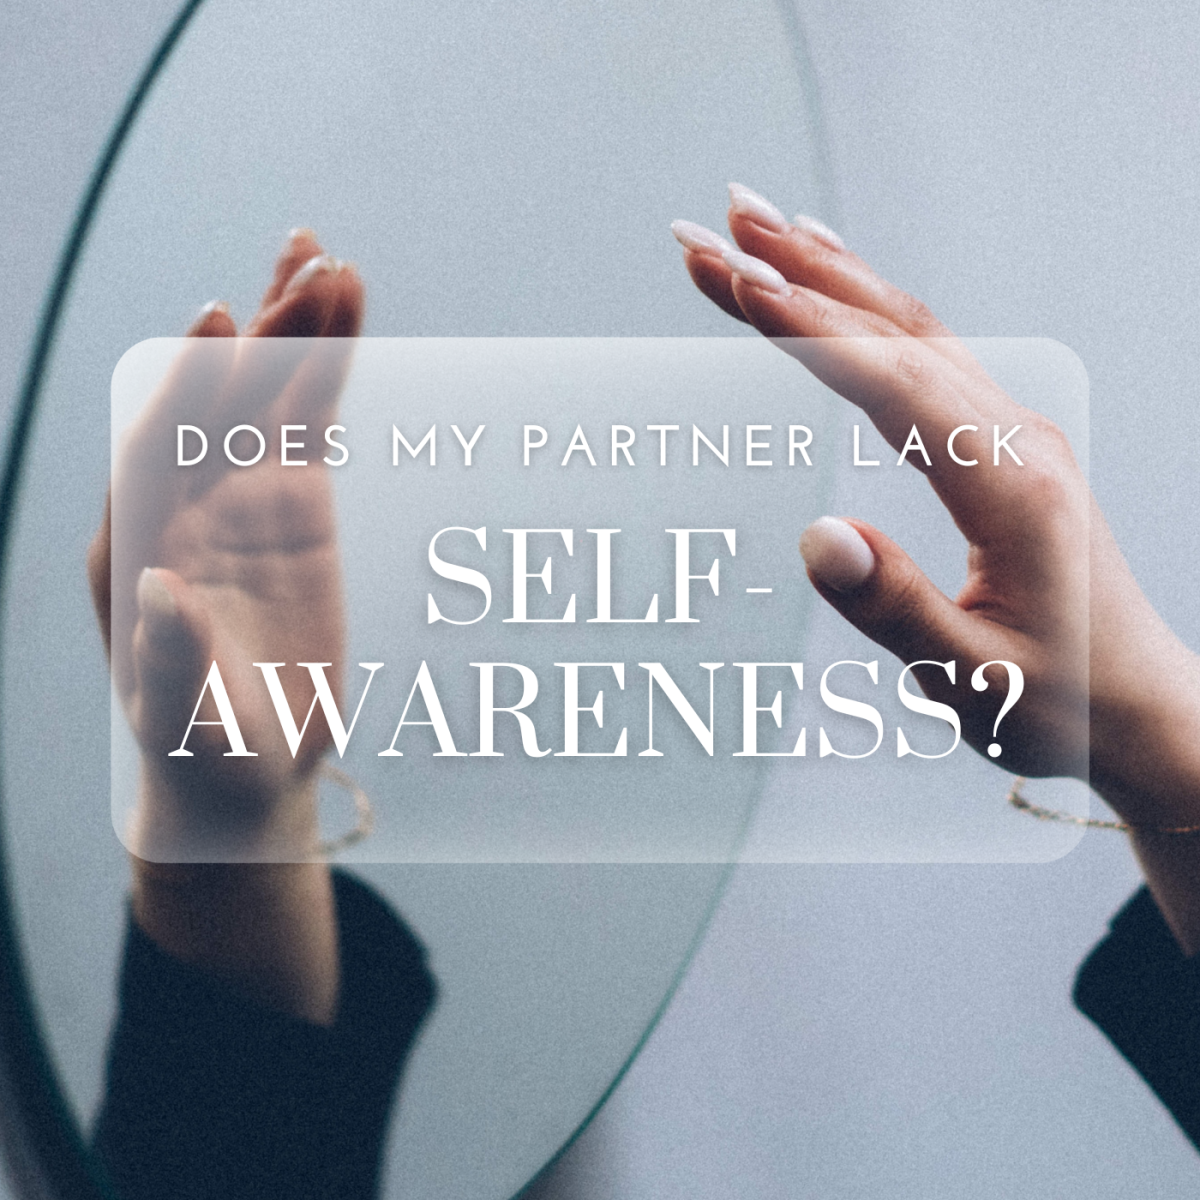 Does your partner lack self-awareness? Read on to learn more